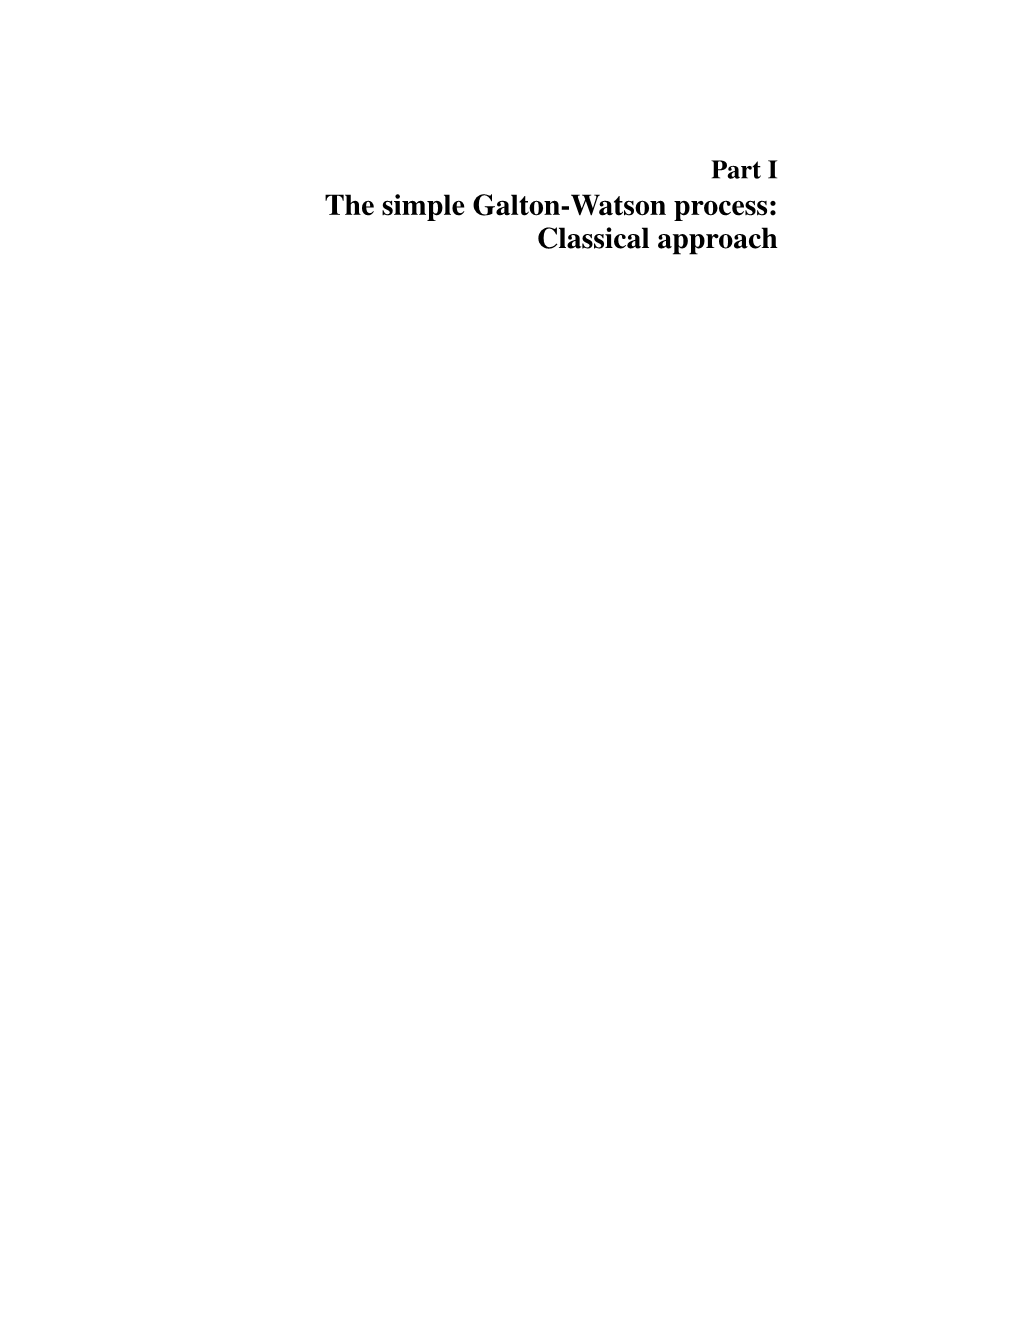 The Simple Galton-Watson Process: Classical Approach